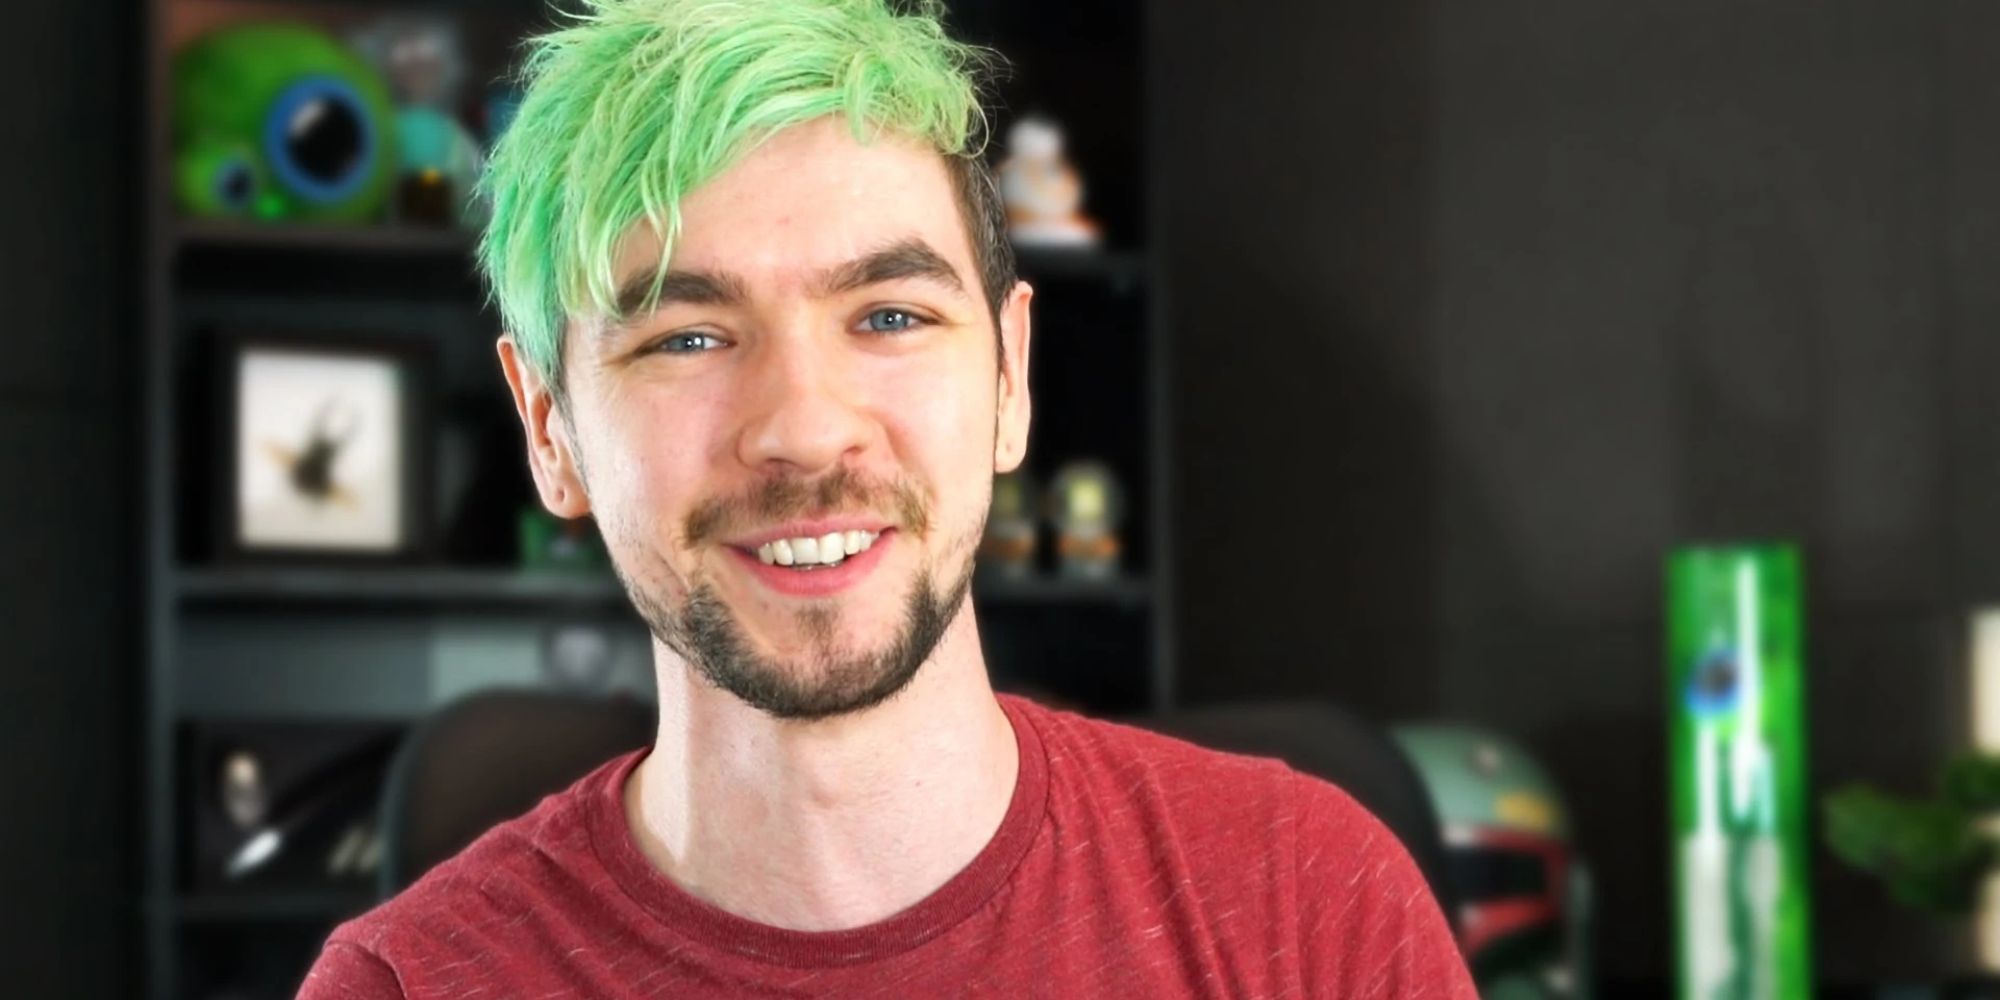 Jacksepticeye's Biographical Documentary To Premiere On Moment House On February 28